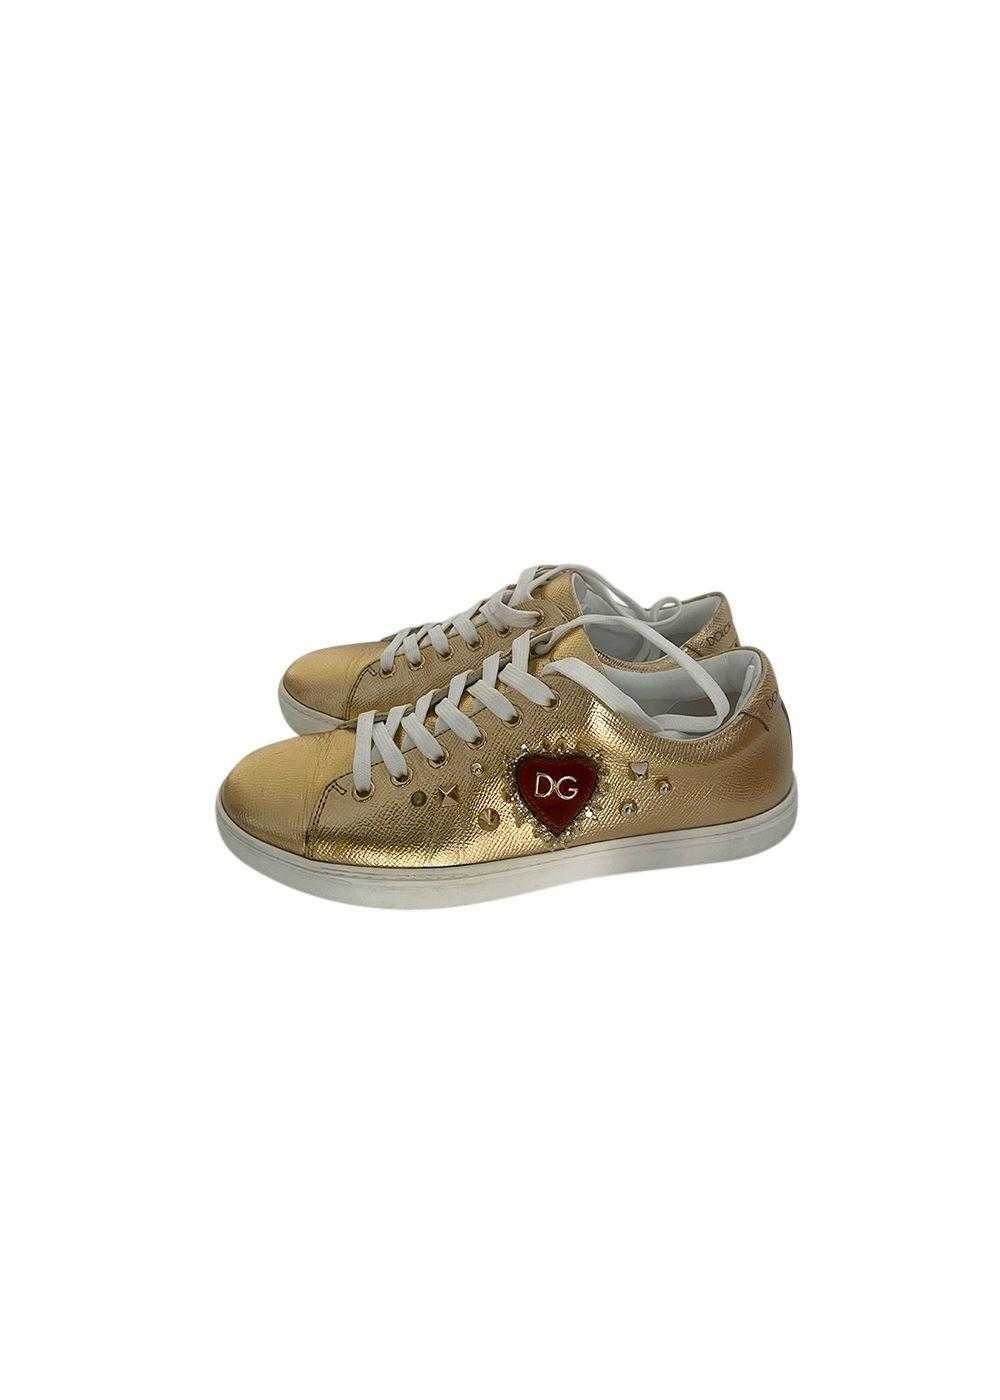 Dolce & Gabbana Gold Leather Devotion Sneakers - image 1